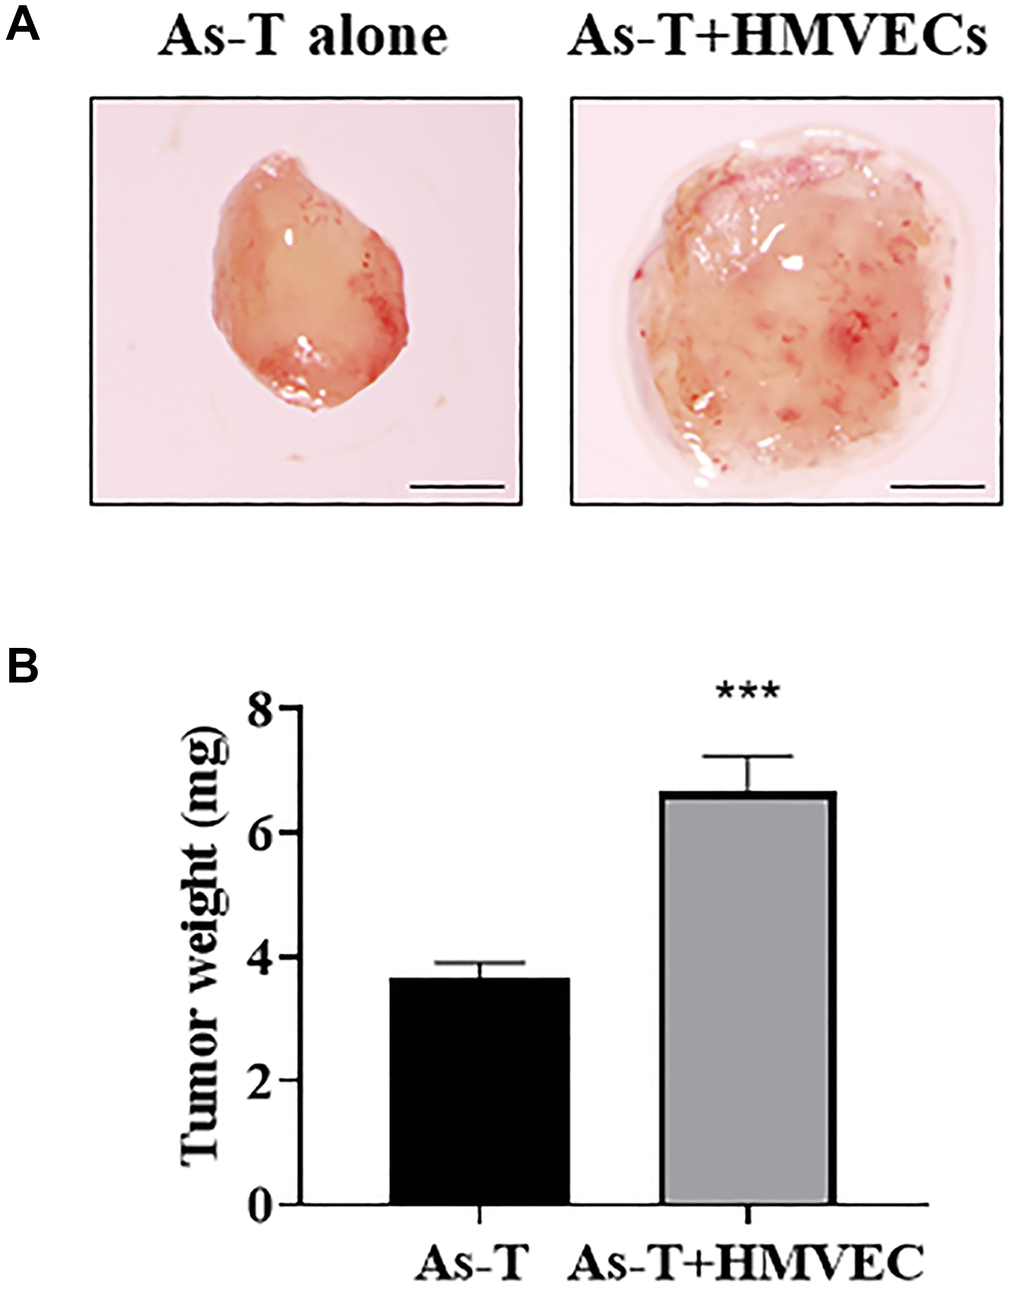 Human endothelial cells greatly promoted As-T cells to induce tumor growth. As-T cells and human dermal microvascular endothelial cells (HMVECs) were trypsinized, mixed in a 1:9 ratio with serum-free medium, and carried by the PLGA sponges for the implantation onto the CAM of 8 days old chicken embryos. As-T cells alone were used as a control. The tumors were harvested 12 days after the implantation. (A) Representative tumors. Scale, 1 mm. (B) The weight of plugs (n = 7 for each group). ***p 